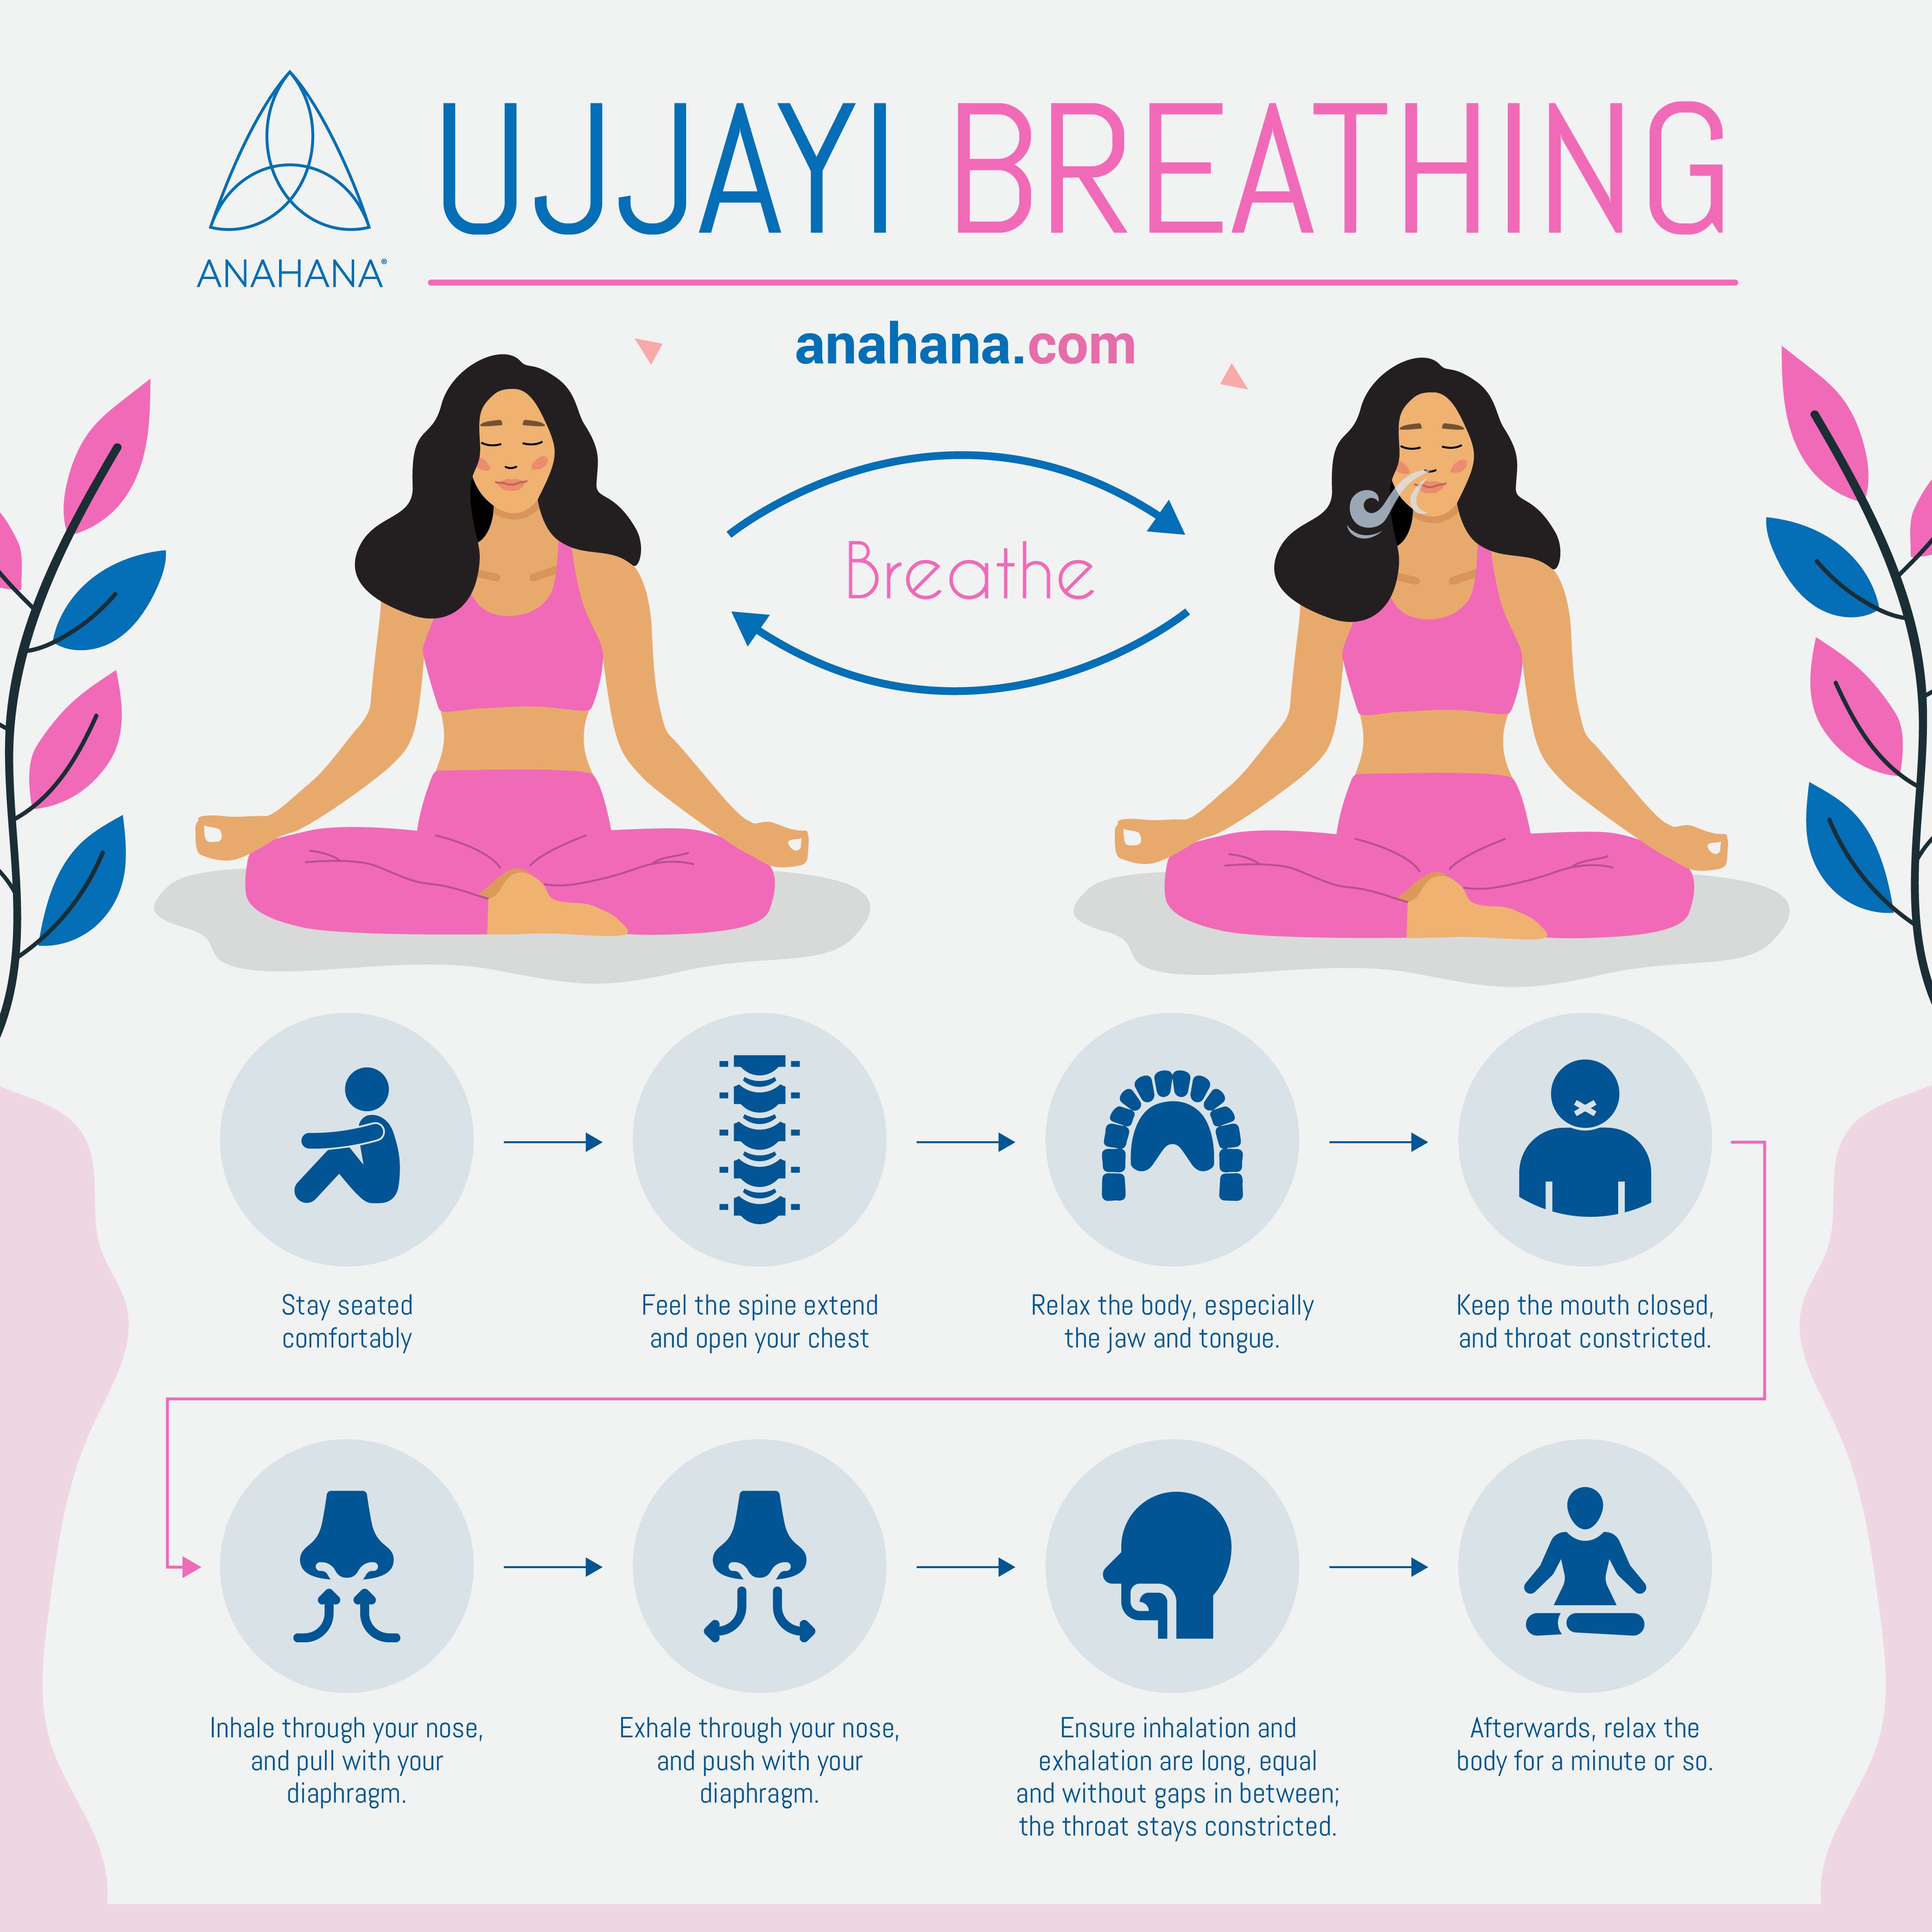 how to perform Ujjayi breathing